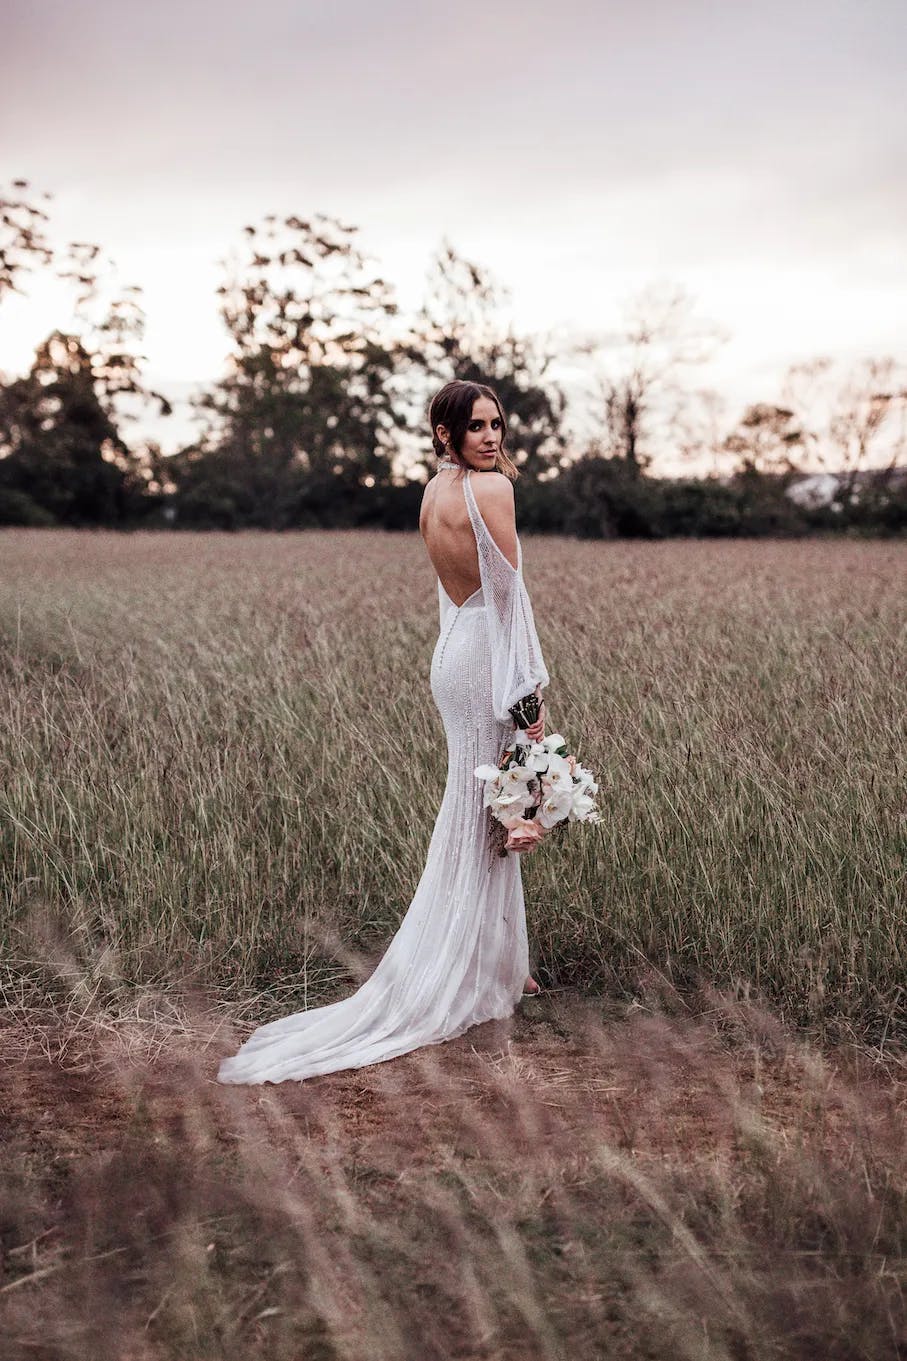 A bride in a backless white wedding dress stands in a field of tall grass, looking over her shoulder. She holds a bouquet of white and pink flowers. Trees are visible in the background under a softly lit, cloudy sky at dusk.